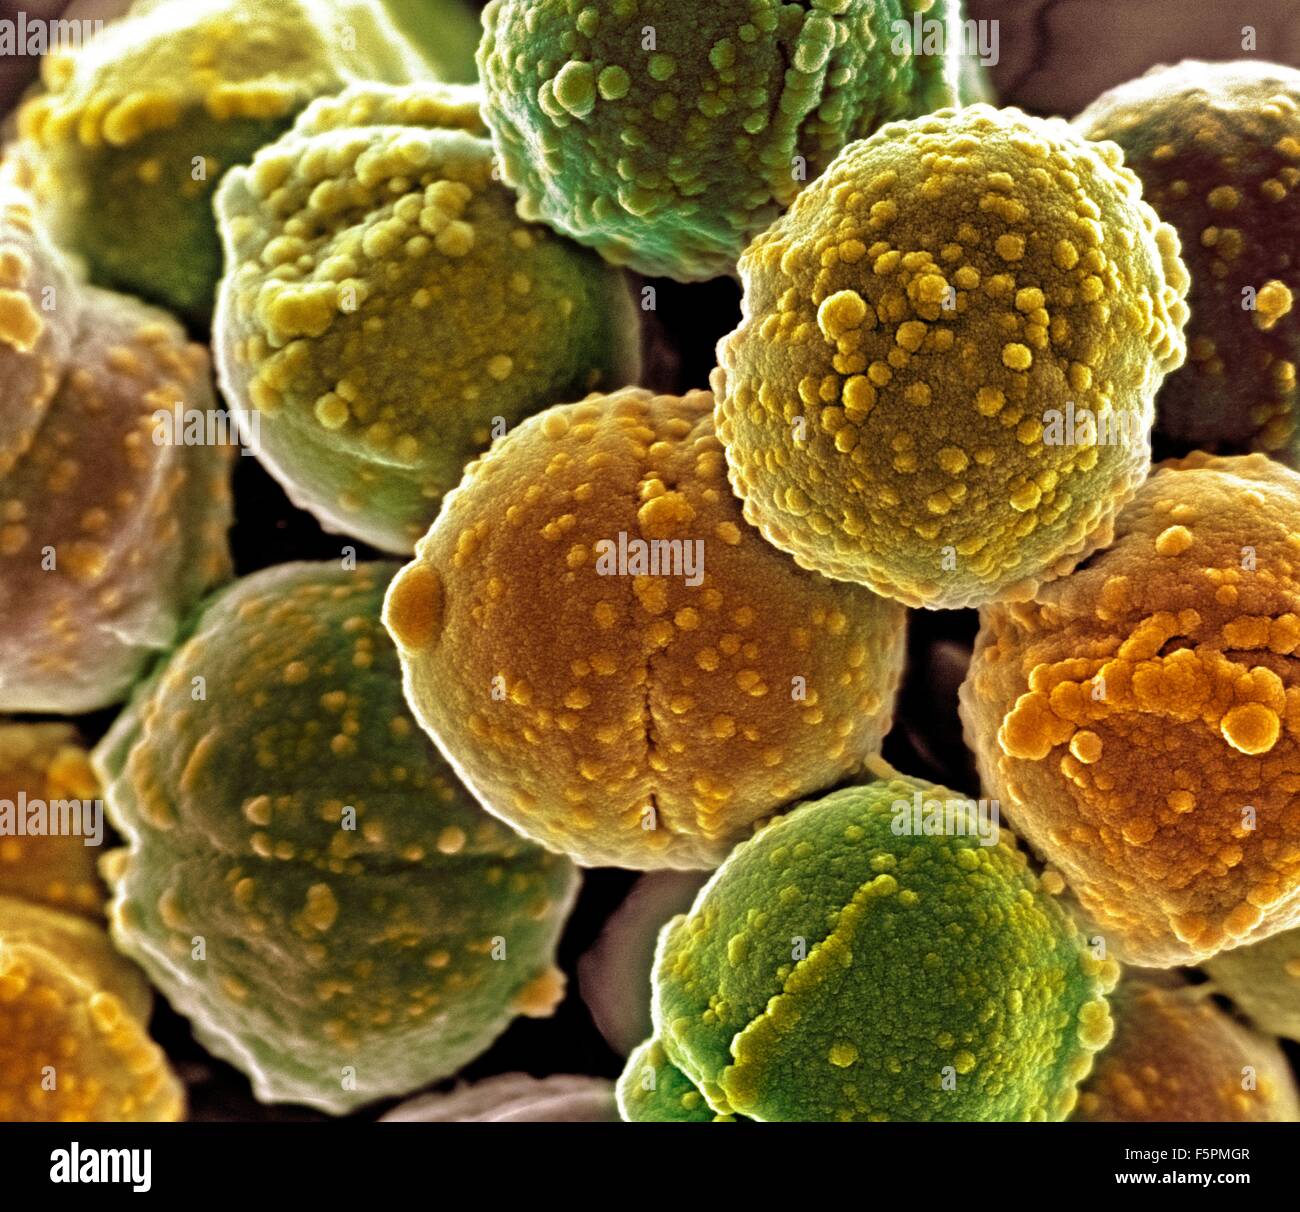 Staphylococcus bacteria, coloured scanning electron micrograph (SEM). Staphylococcus bacteria are an example of cocci (round Stock Photo